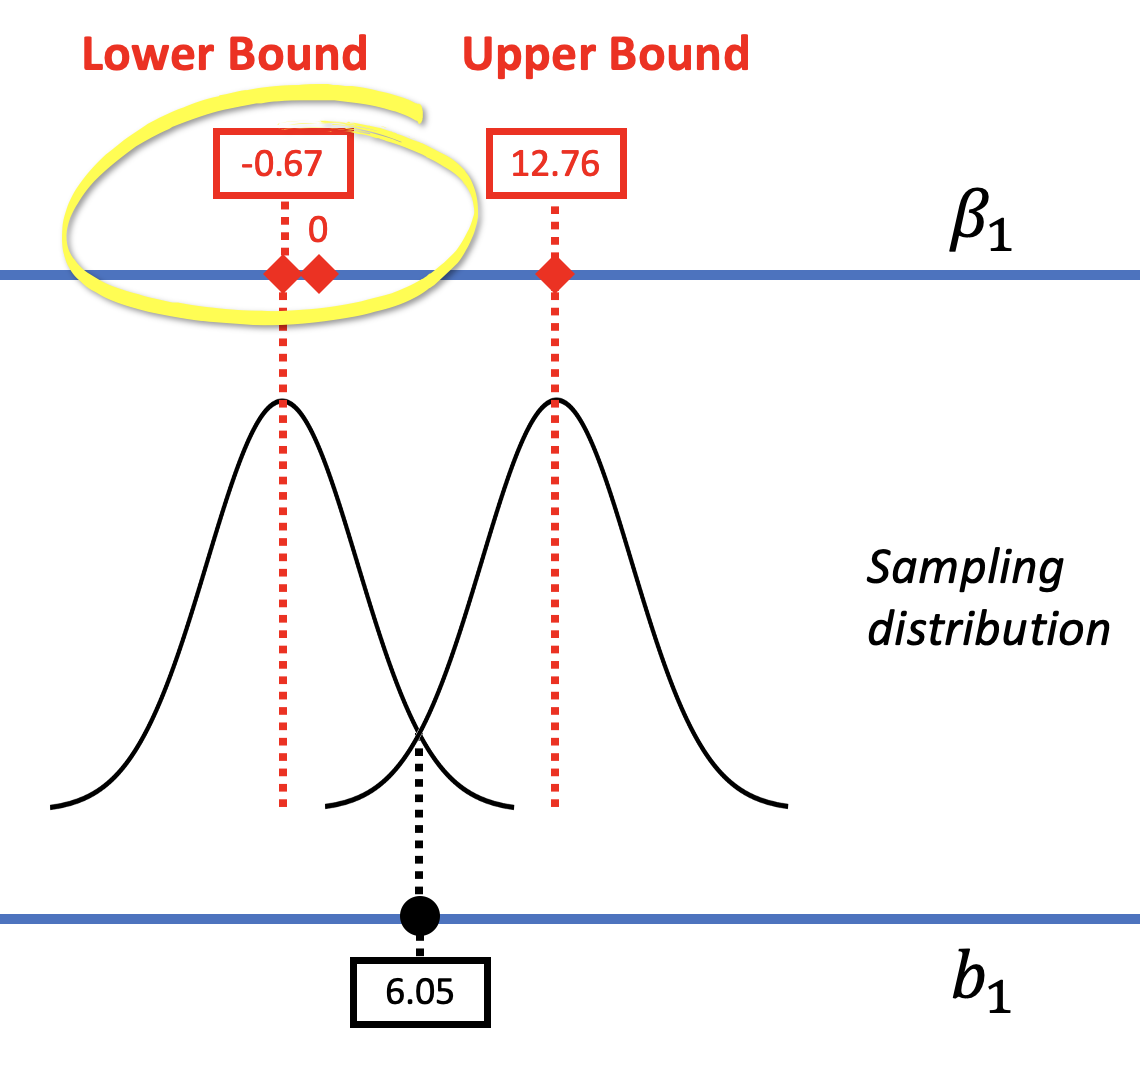 On the left, a diagram of using a confidence interval to evaluate the empty model. It depicts the three-layered diagram, with the outlines of the lower bound and upper bound sampling distributions, and the sample b1 of 6.05 in the middle. The value for the lower bound of negative 0.67 on the top line is circled in yellow. Near that value, we also capture a beta-sub-1 of zero, within the middle 95 percent of those samples.